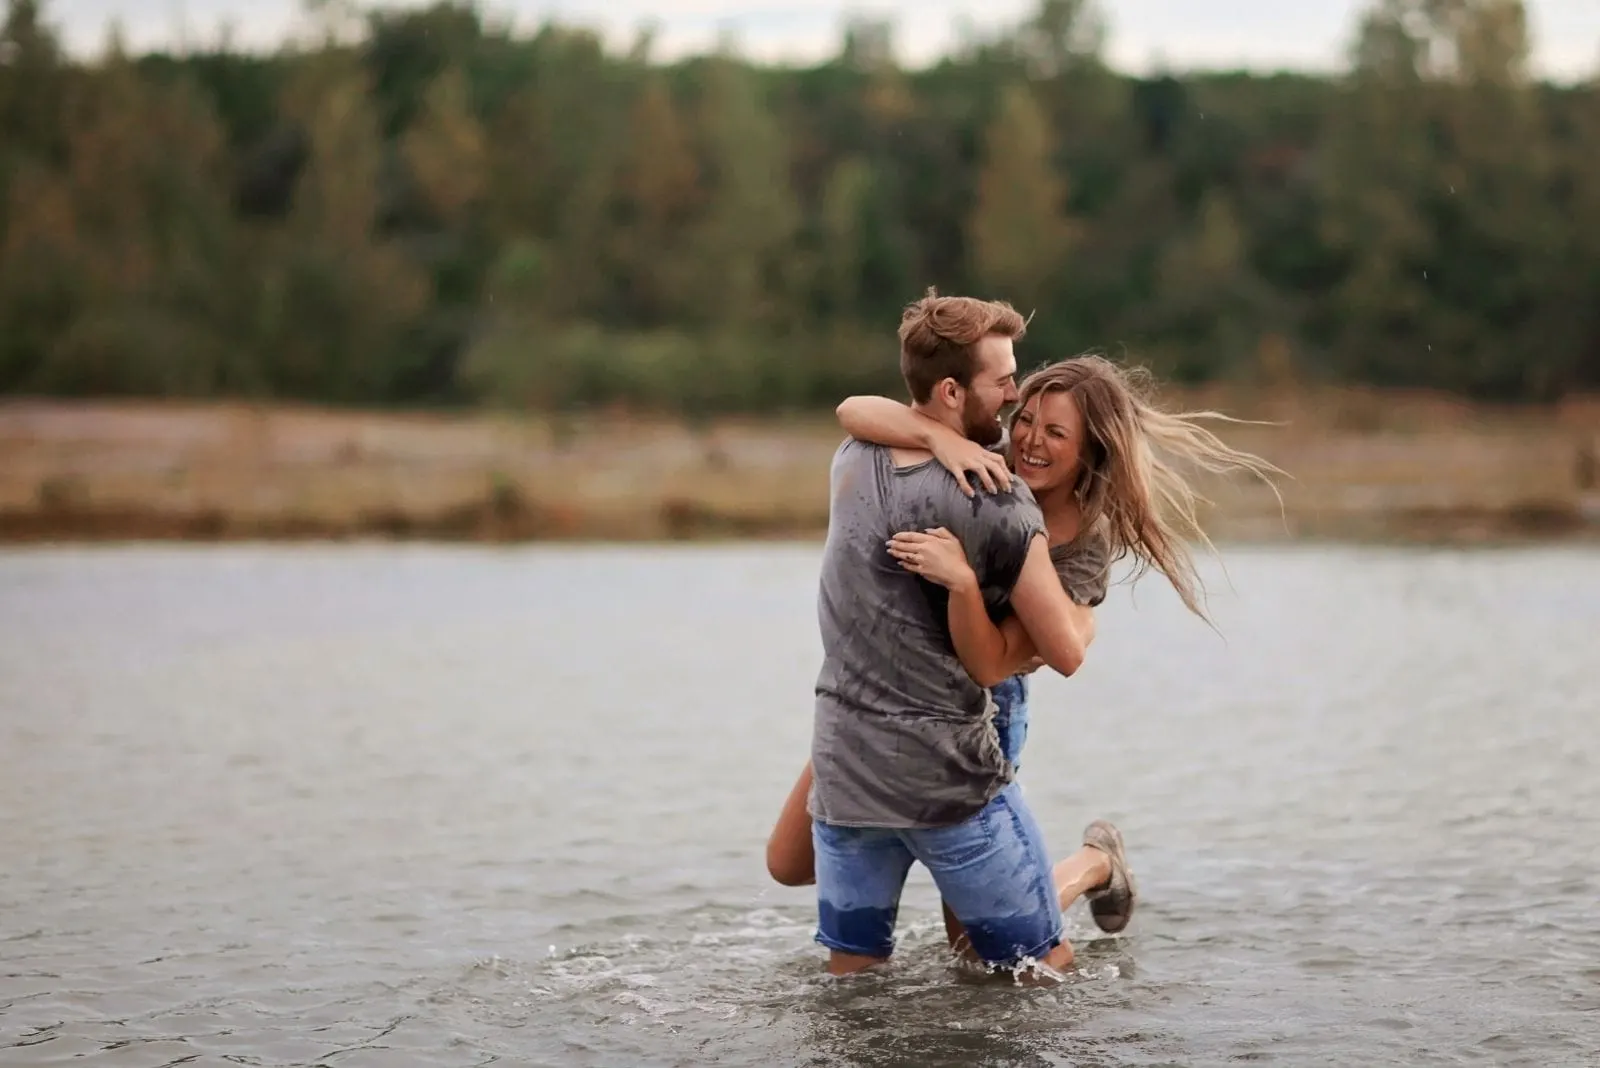 man hugging and playing with his girlfriend in the waters by lifting her laughing